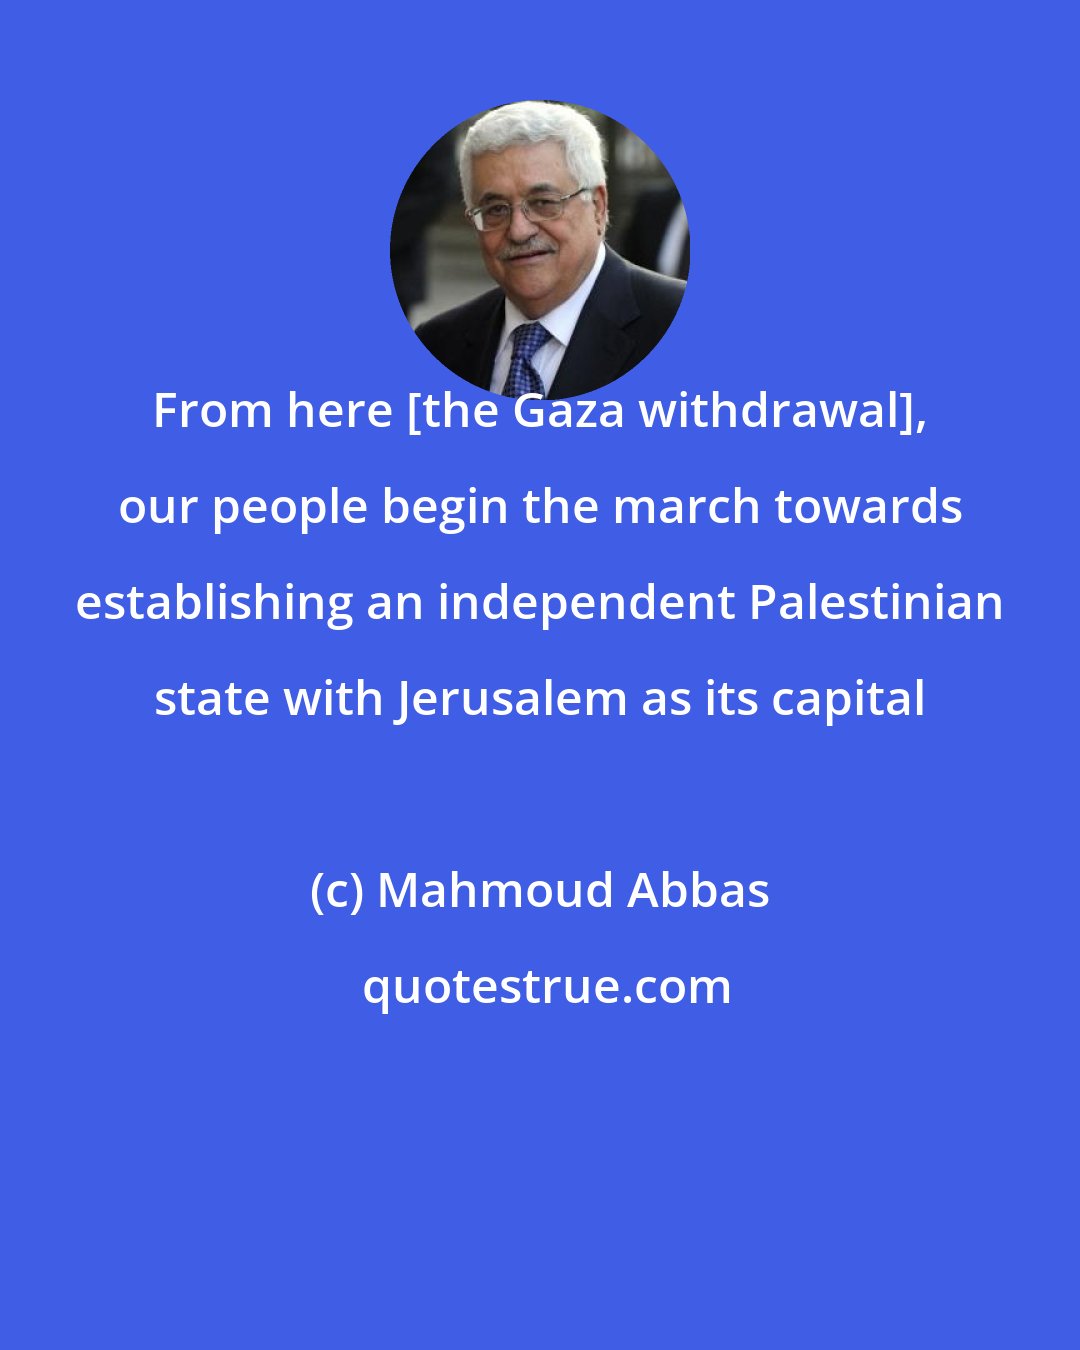 Mahmoud Abbas: From here [the Gaza withdrawal], our people begin the march towards establishing an independent Palestinian state with Jerusalem as its capital